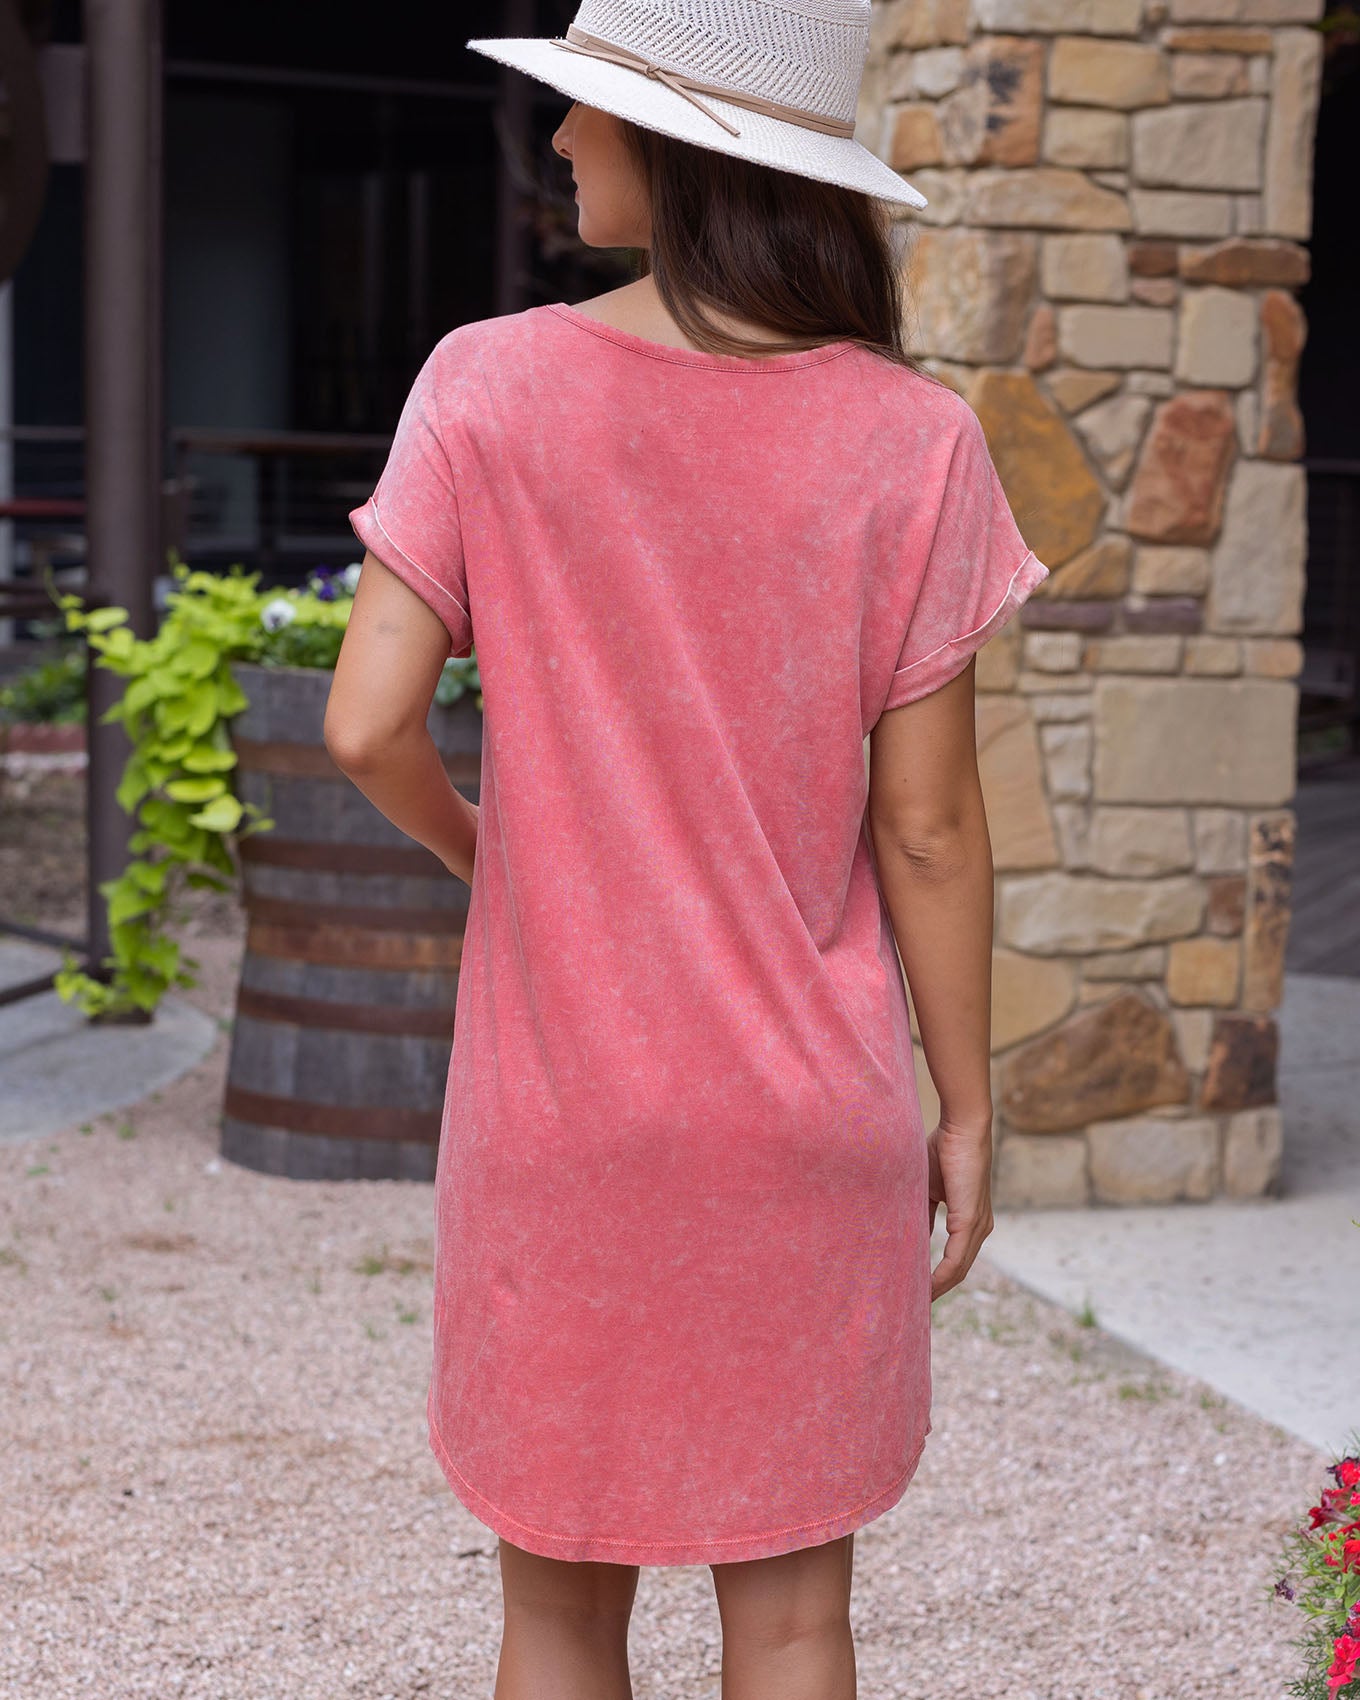 Nashville- Mineral Wash Graphic T-shirt Dress or Tee - Pink